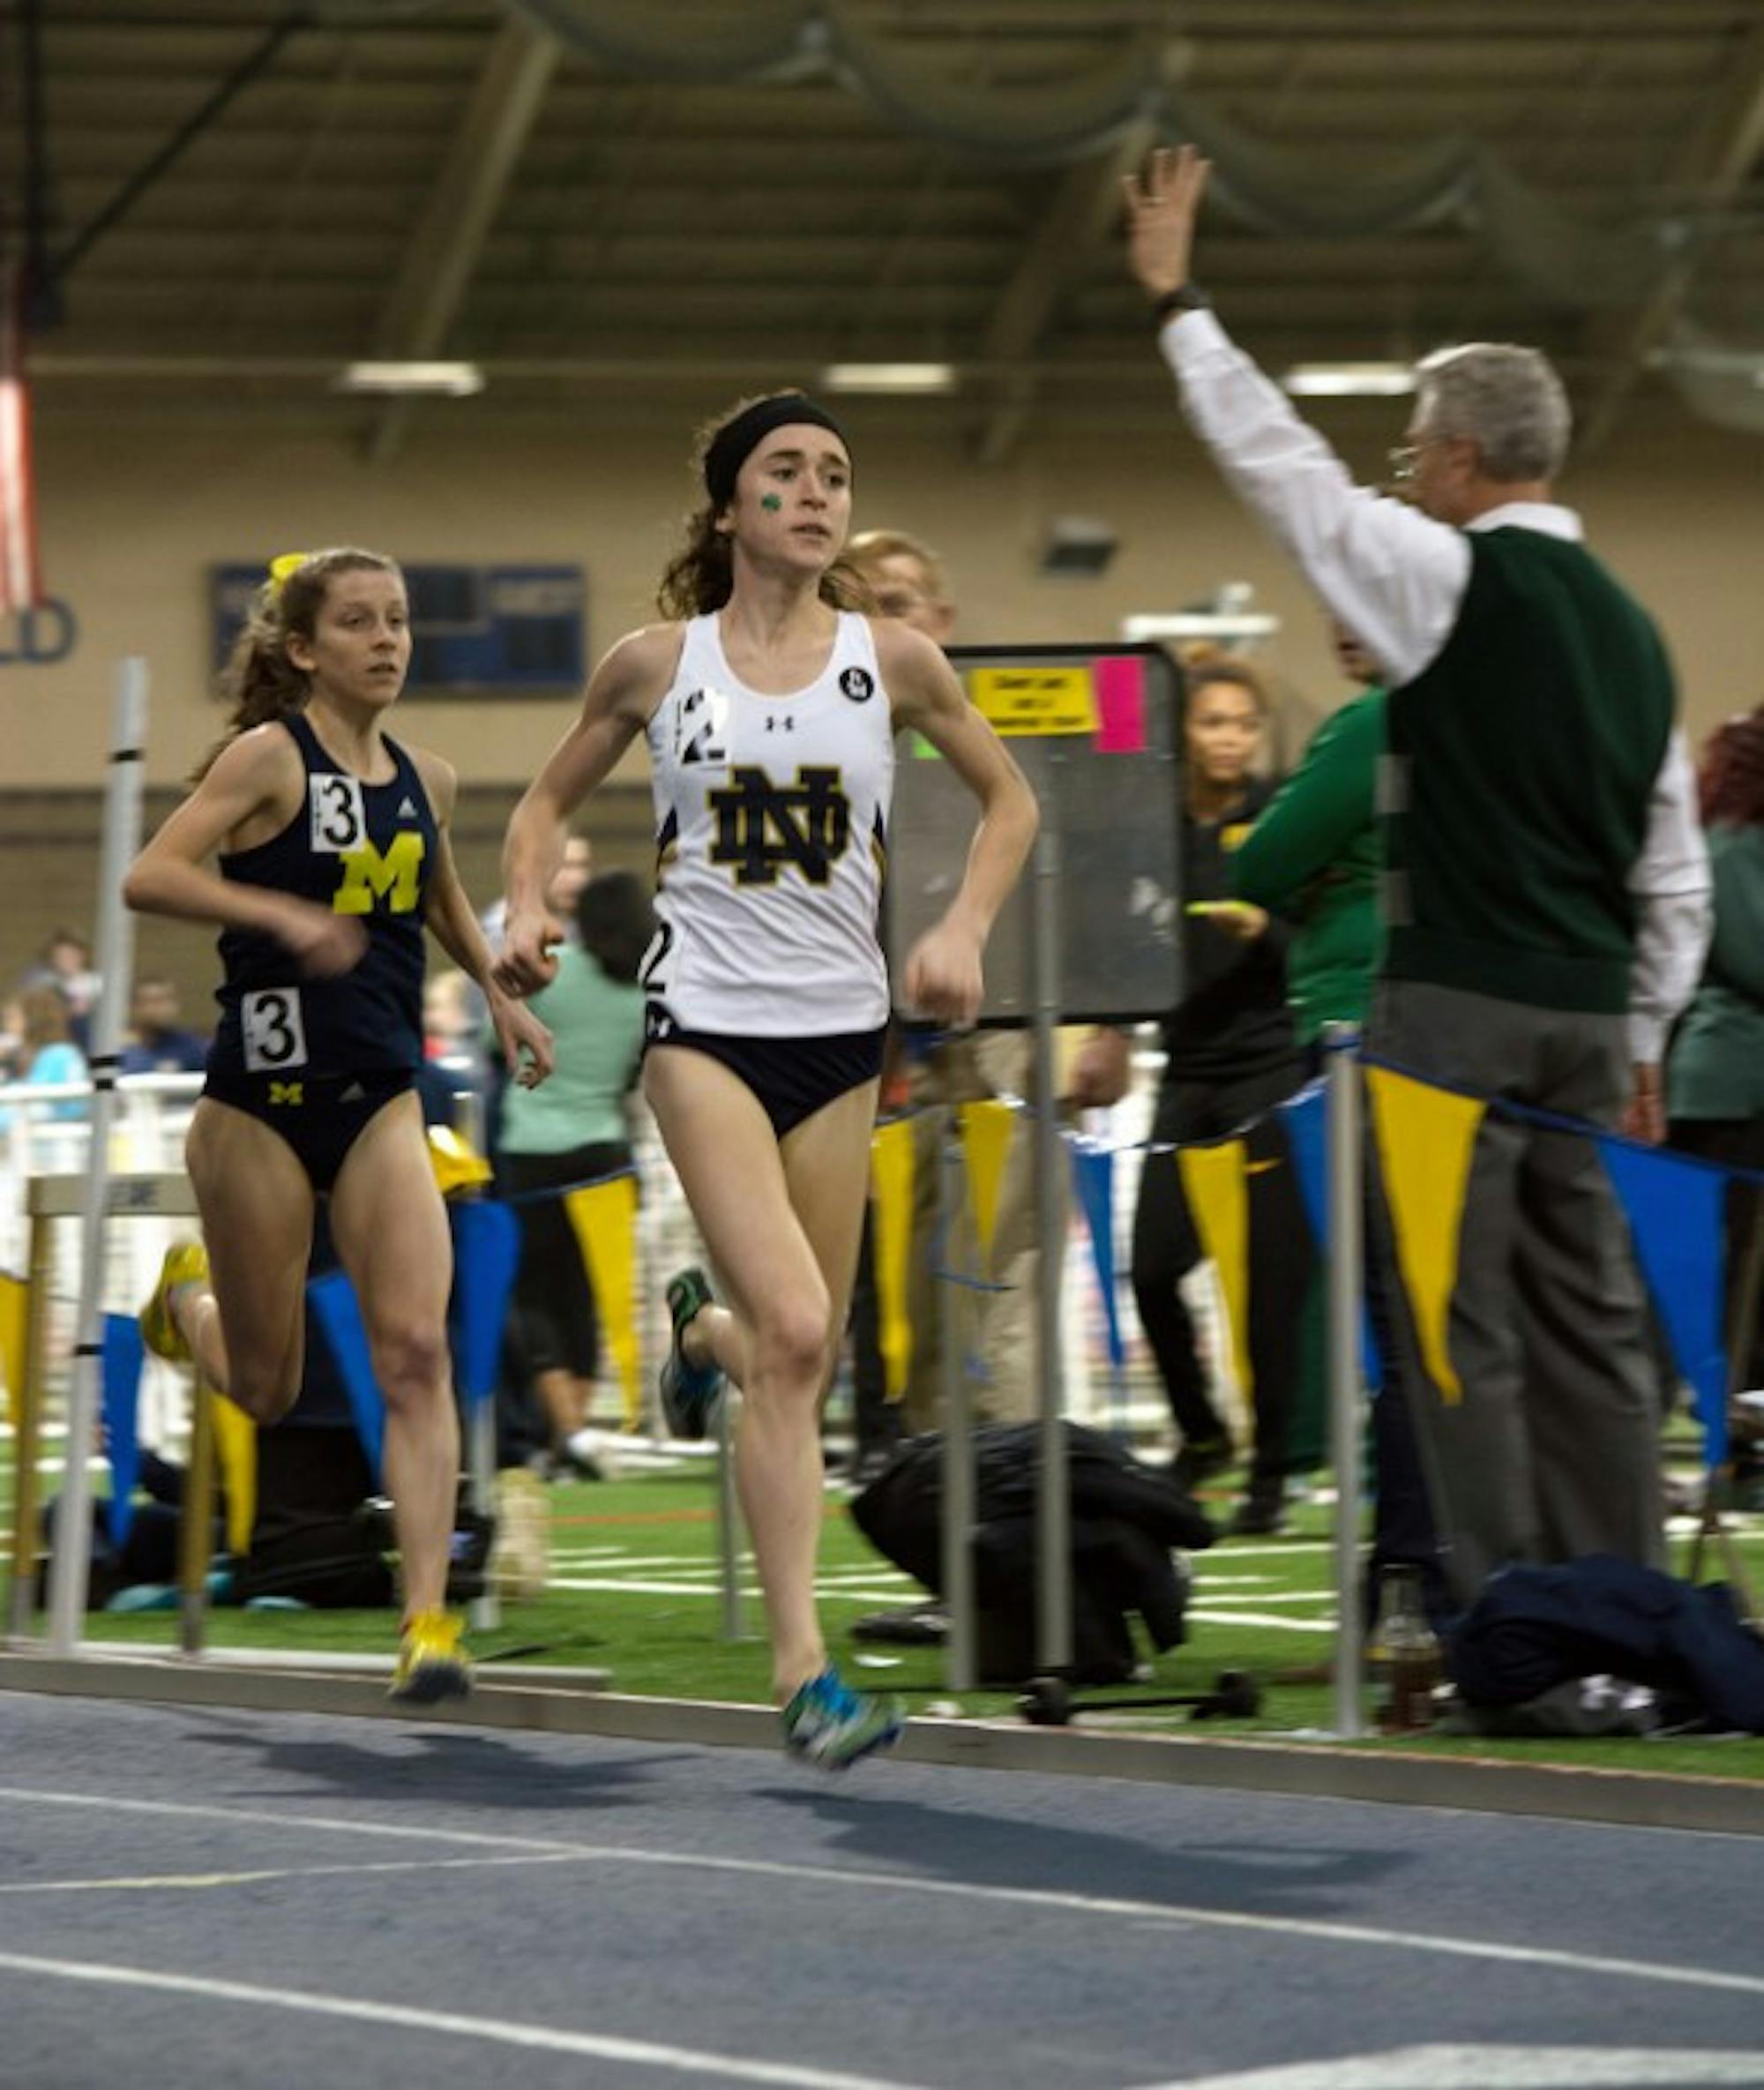 Irish senior Molly Seidel starts her final lap in the 3,000-meter run during the Meyo Invitational on Saturday. Seidel broke Molly Huddle’s previous school record in the event with a time of 8:57.13.